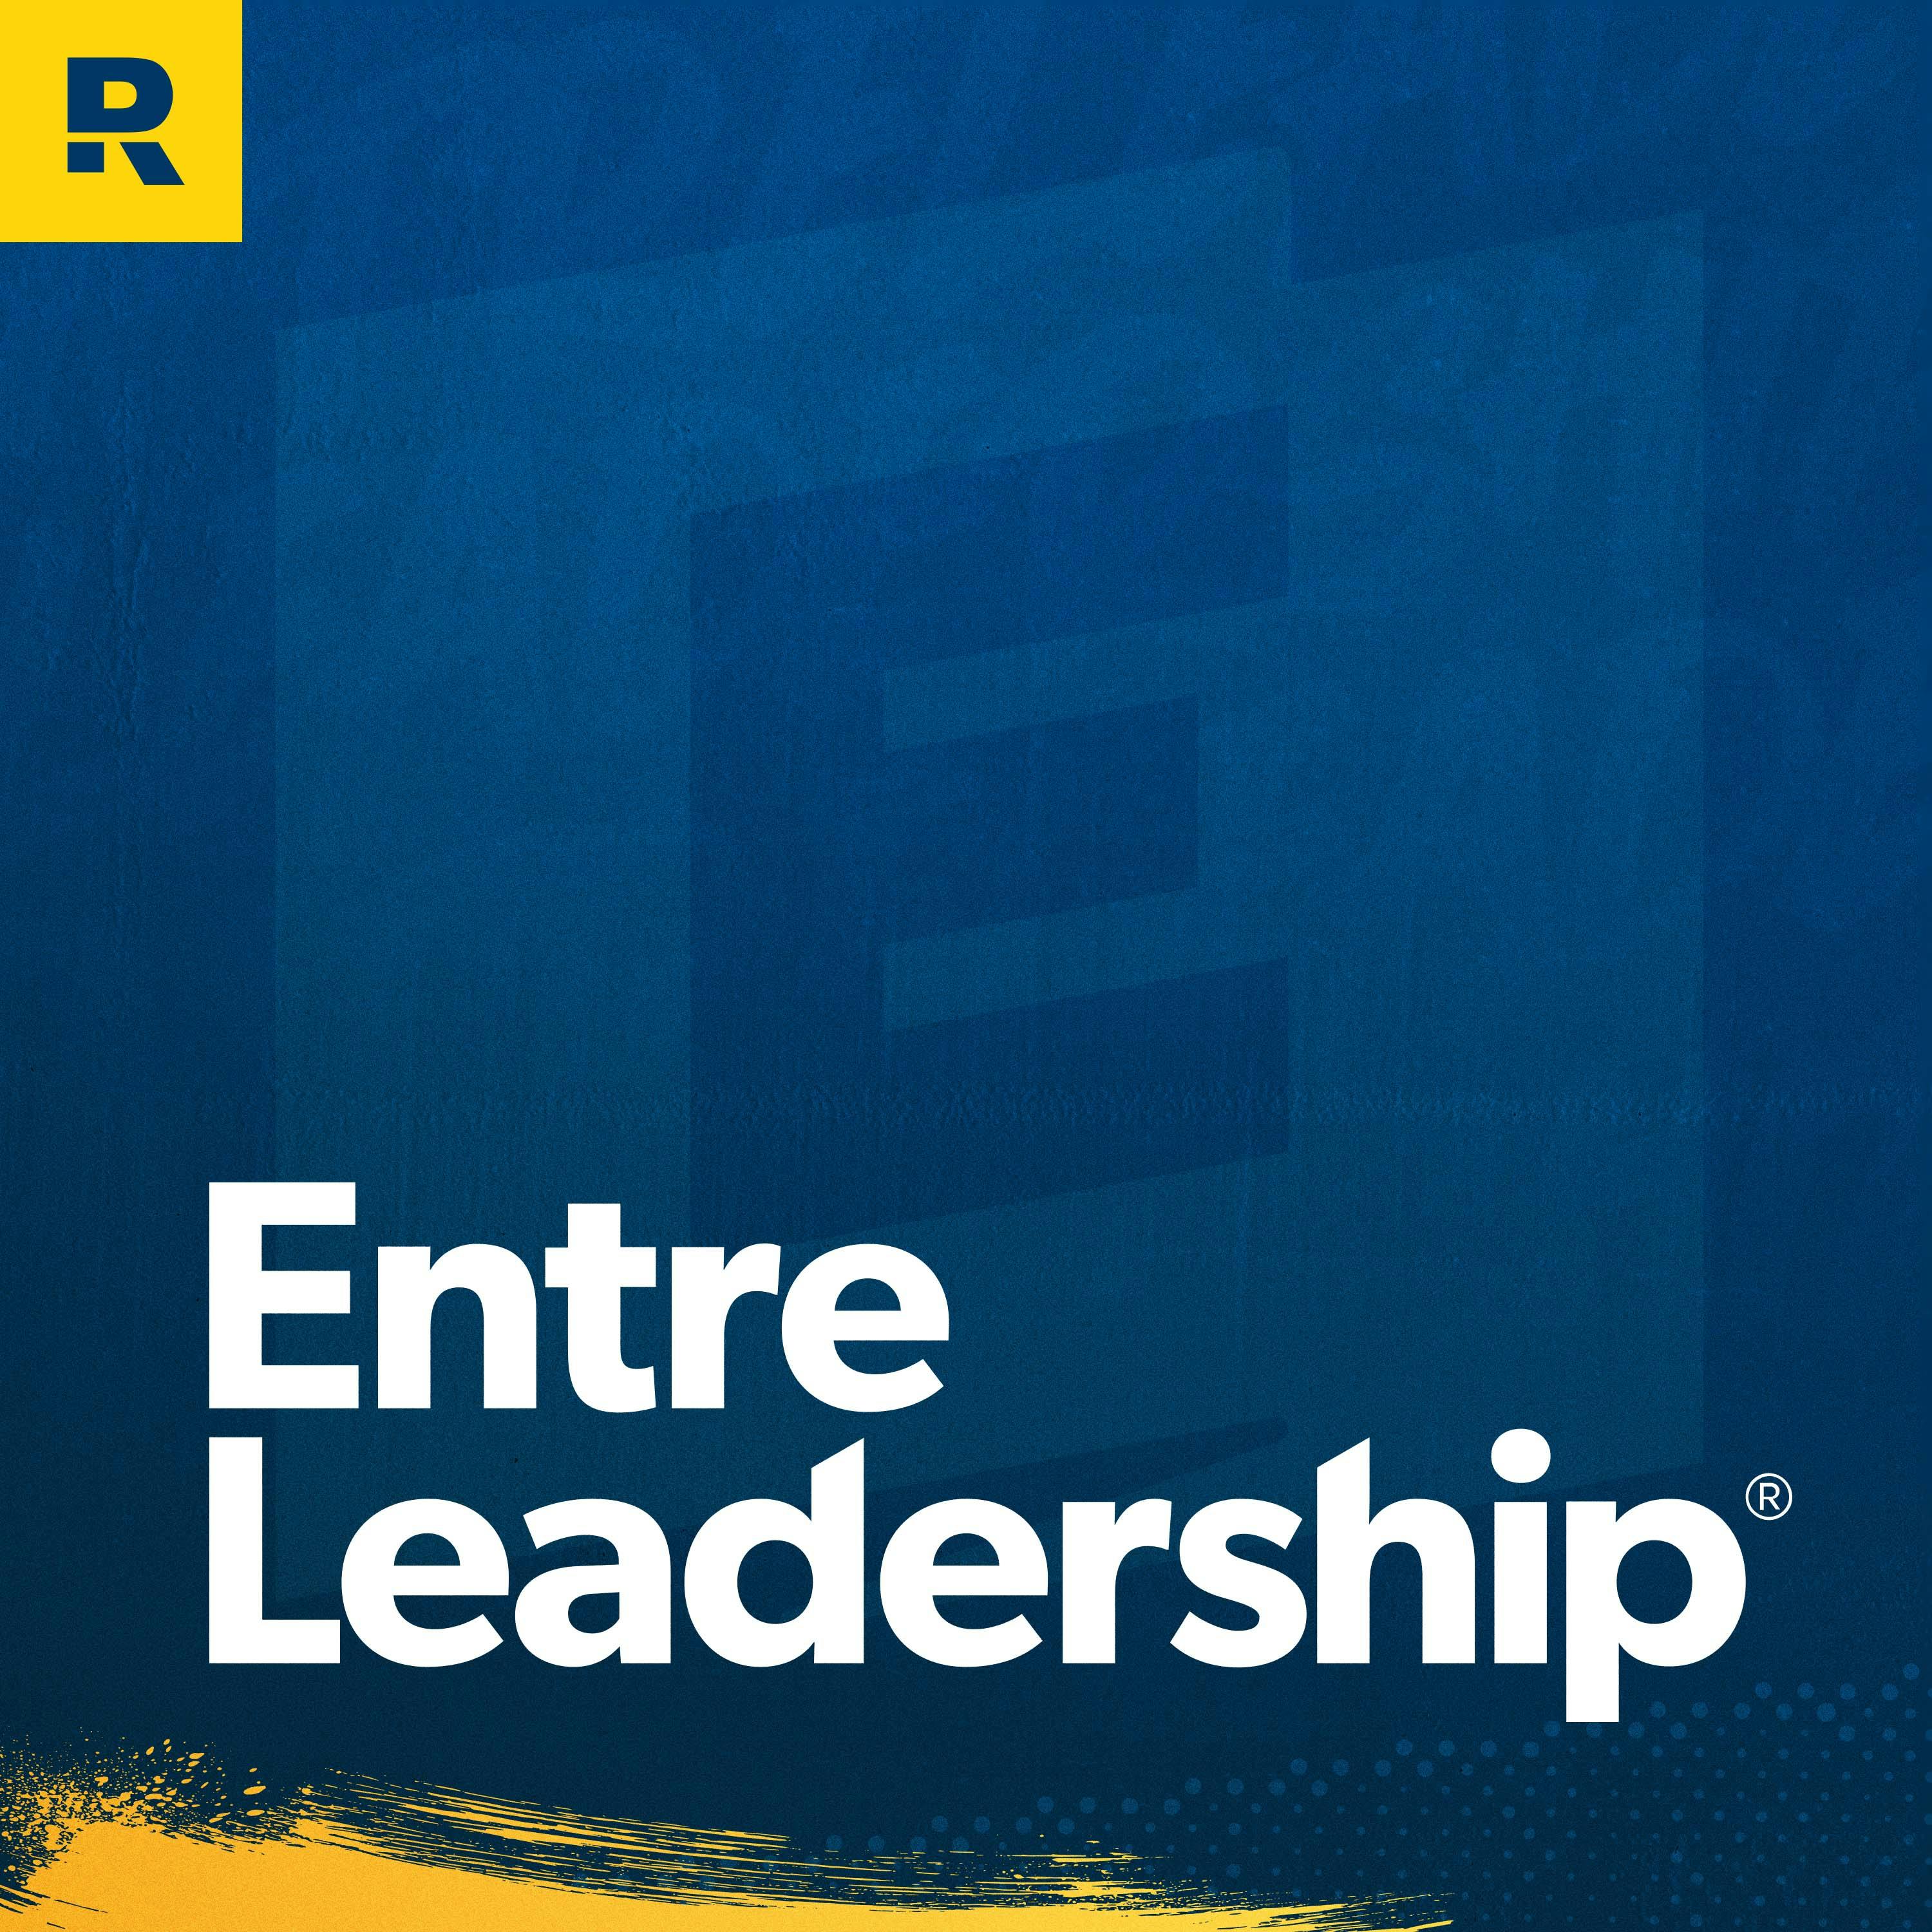 The EntreLeadership Podcast:Ramsey Network